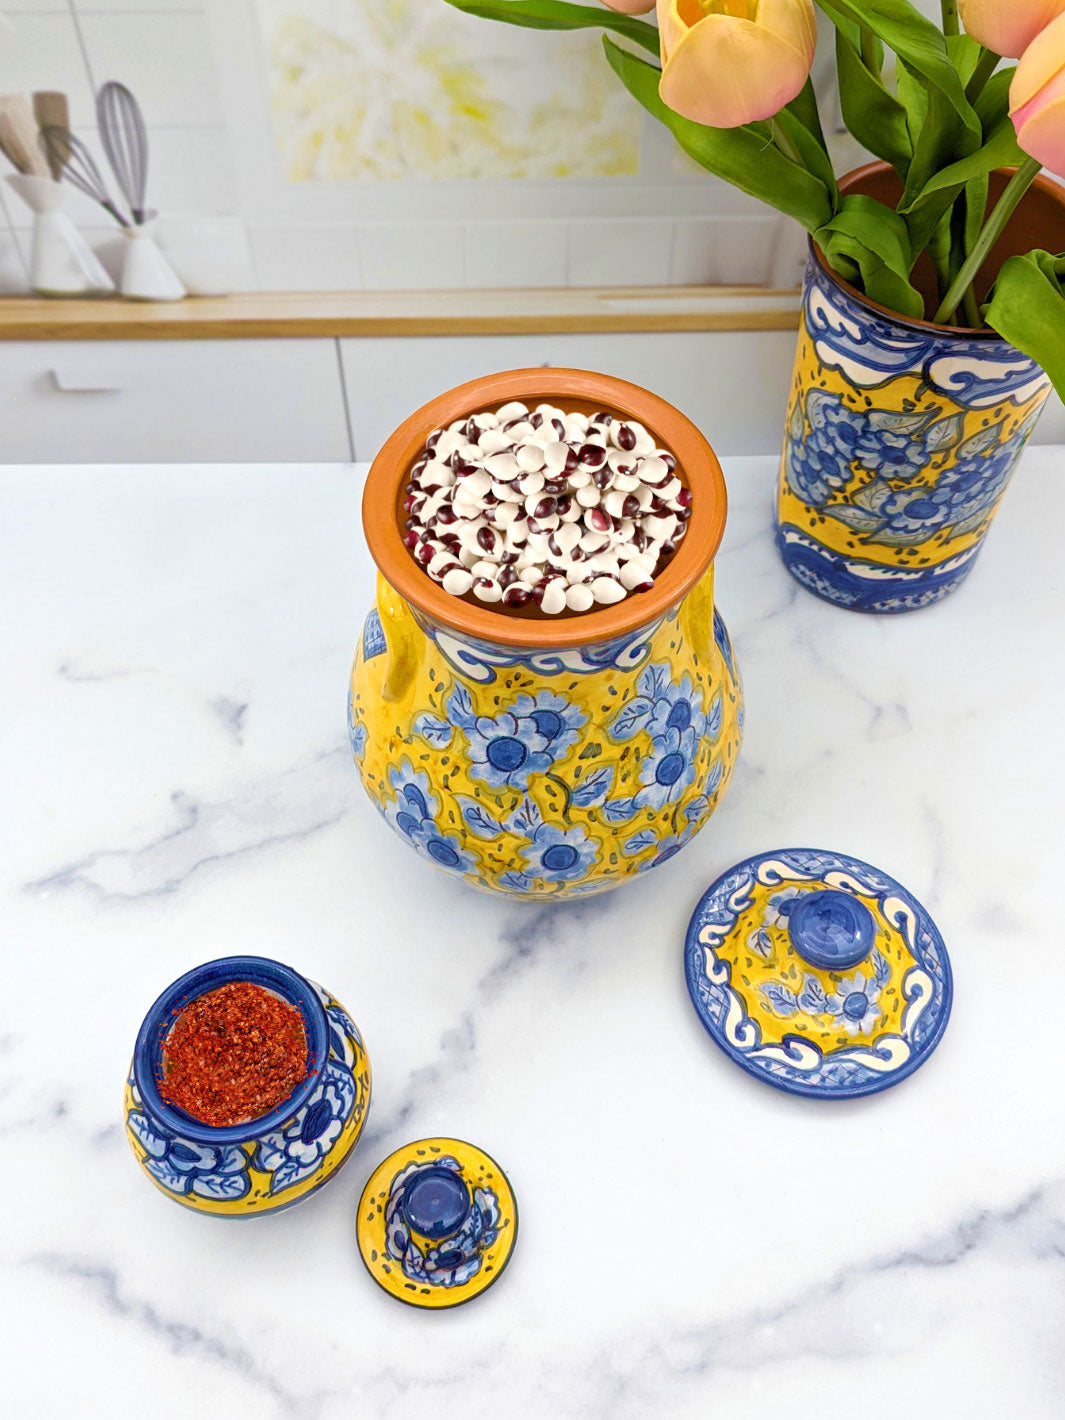 Blue & Yellow Vintage Floral Ceramic Kitchen Canisters - Set of 2